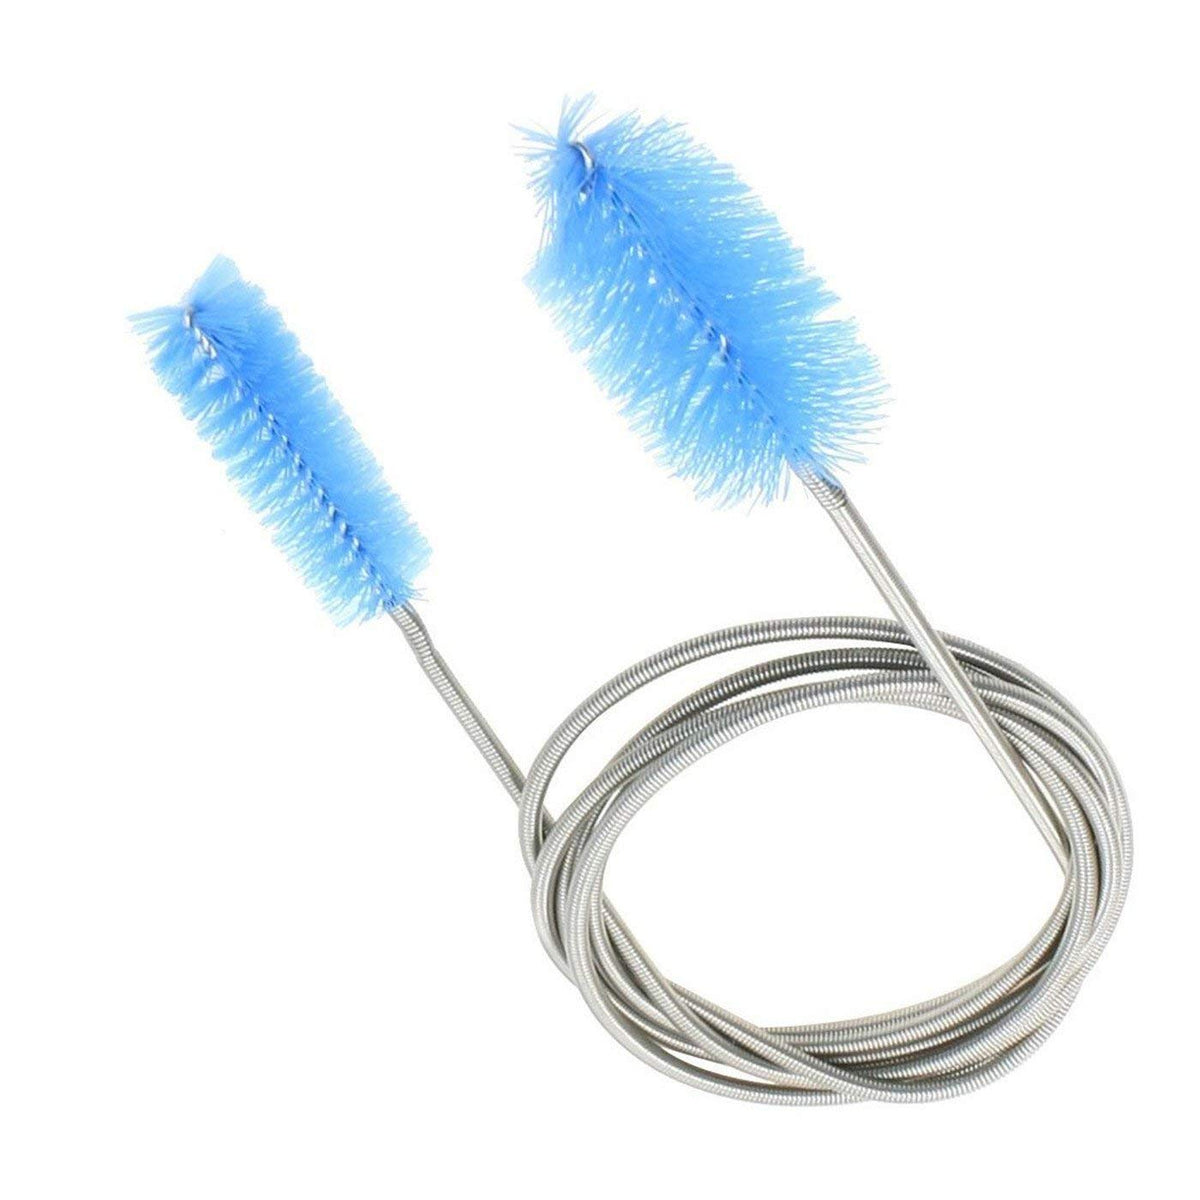 WEITY 2 Pack Aquarium Cleaning Brushes, 61-Inch Stainless Steel